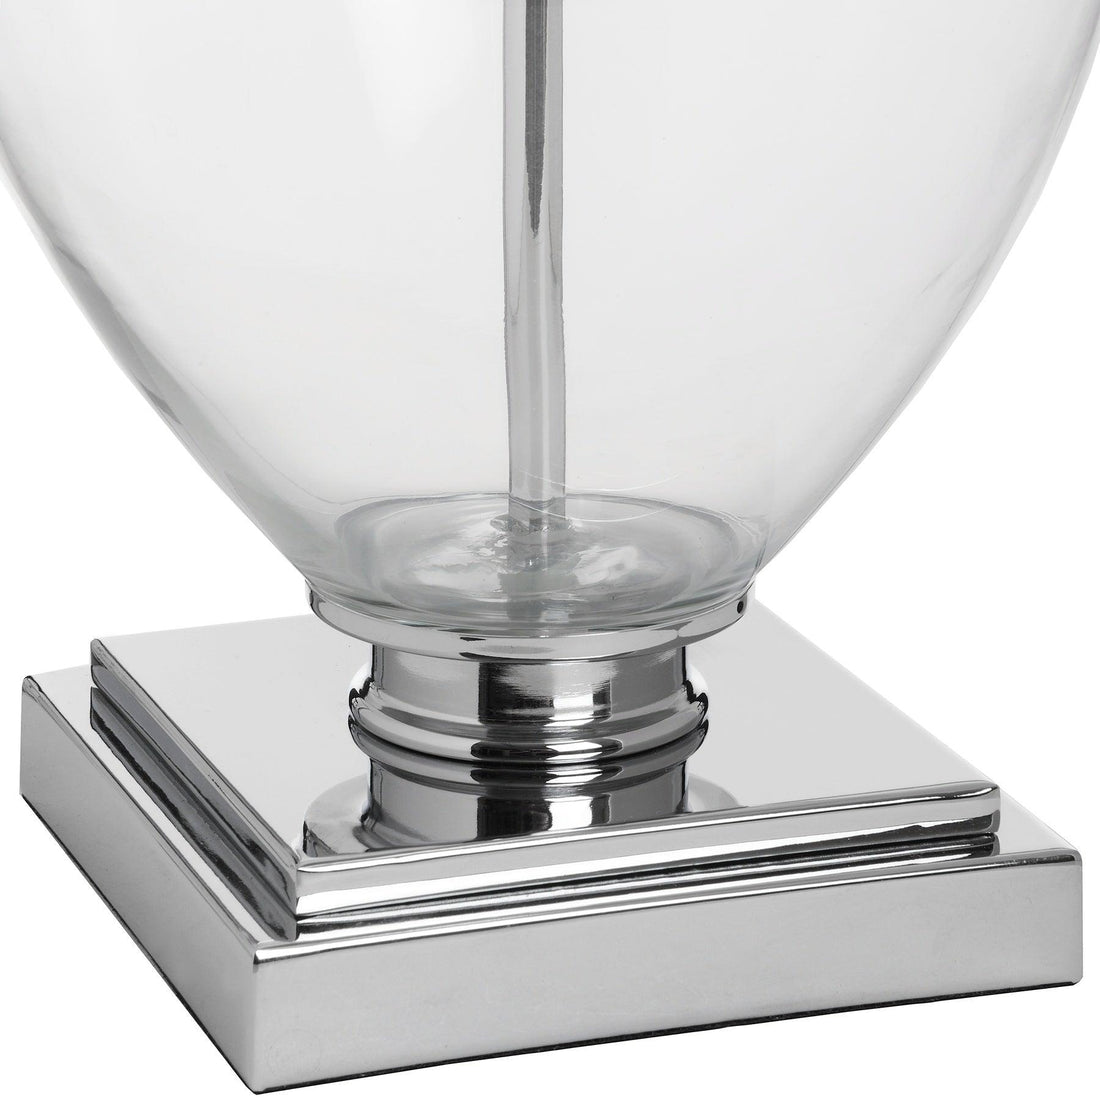 Perugia Glass Table lamp - £209.95 - Lighting > Table Lamps > Hottest Deals 